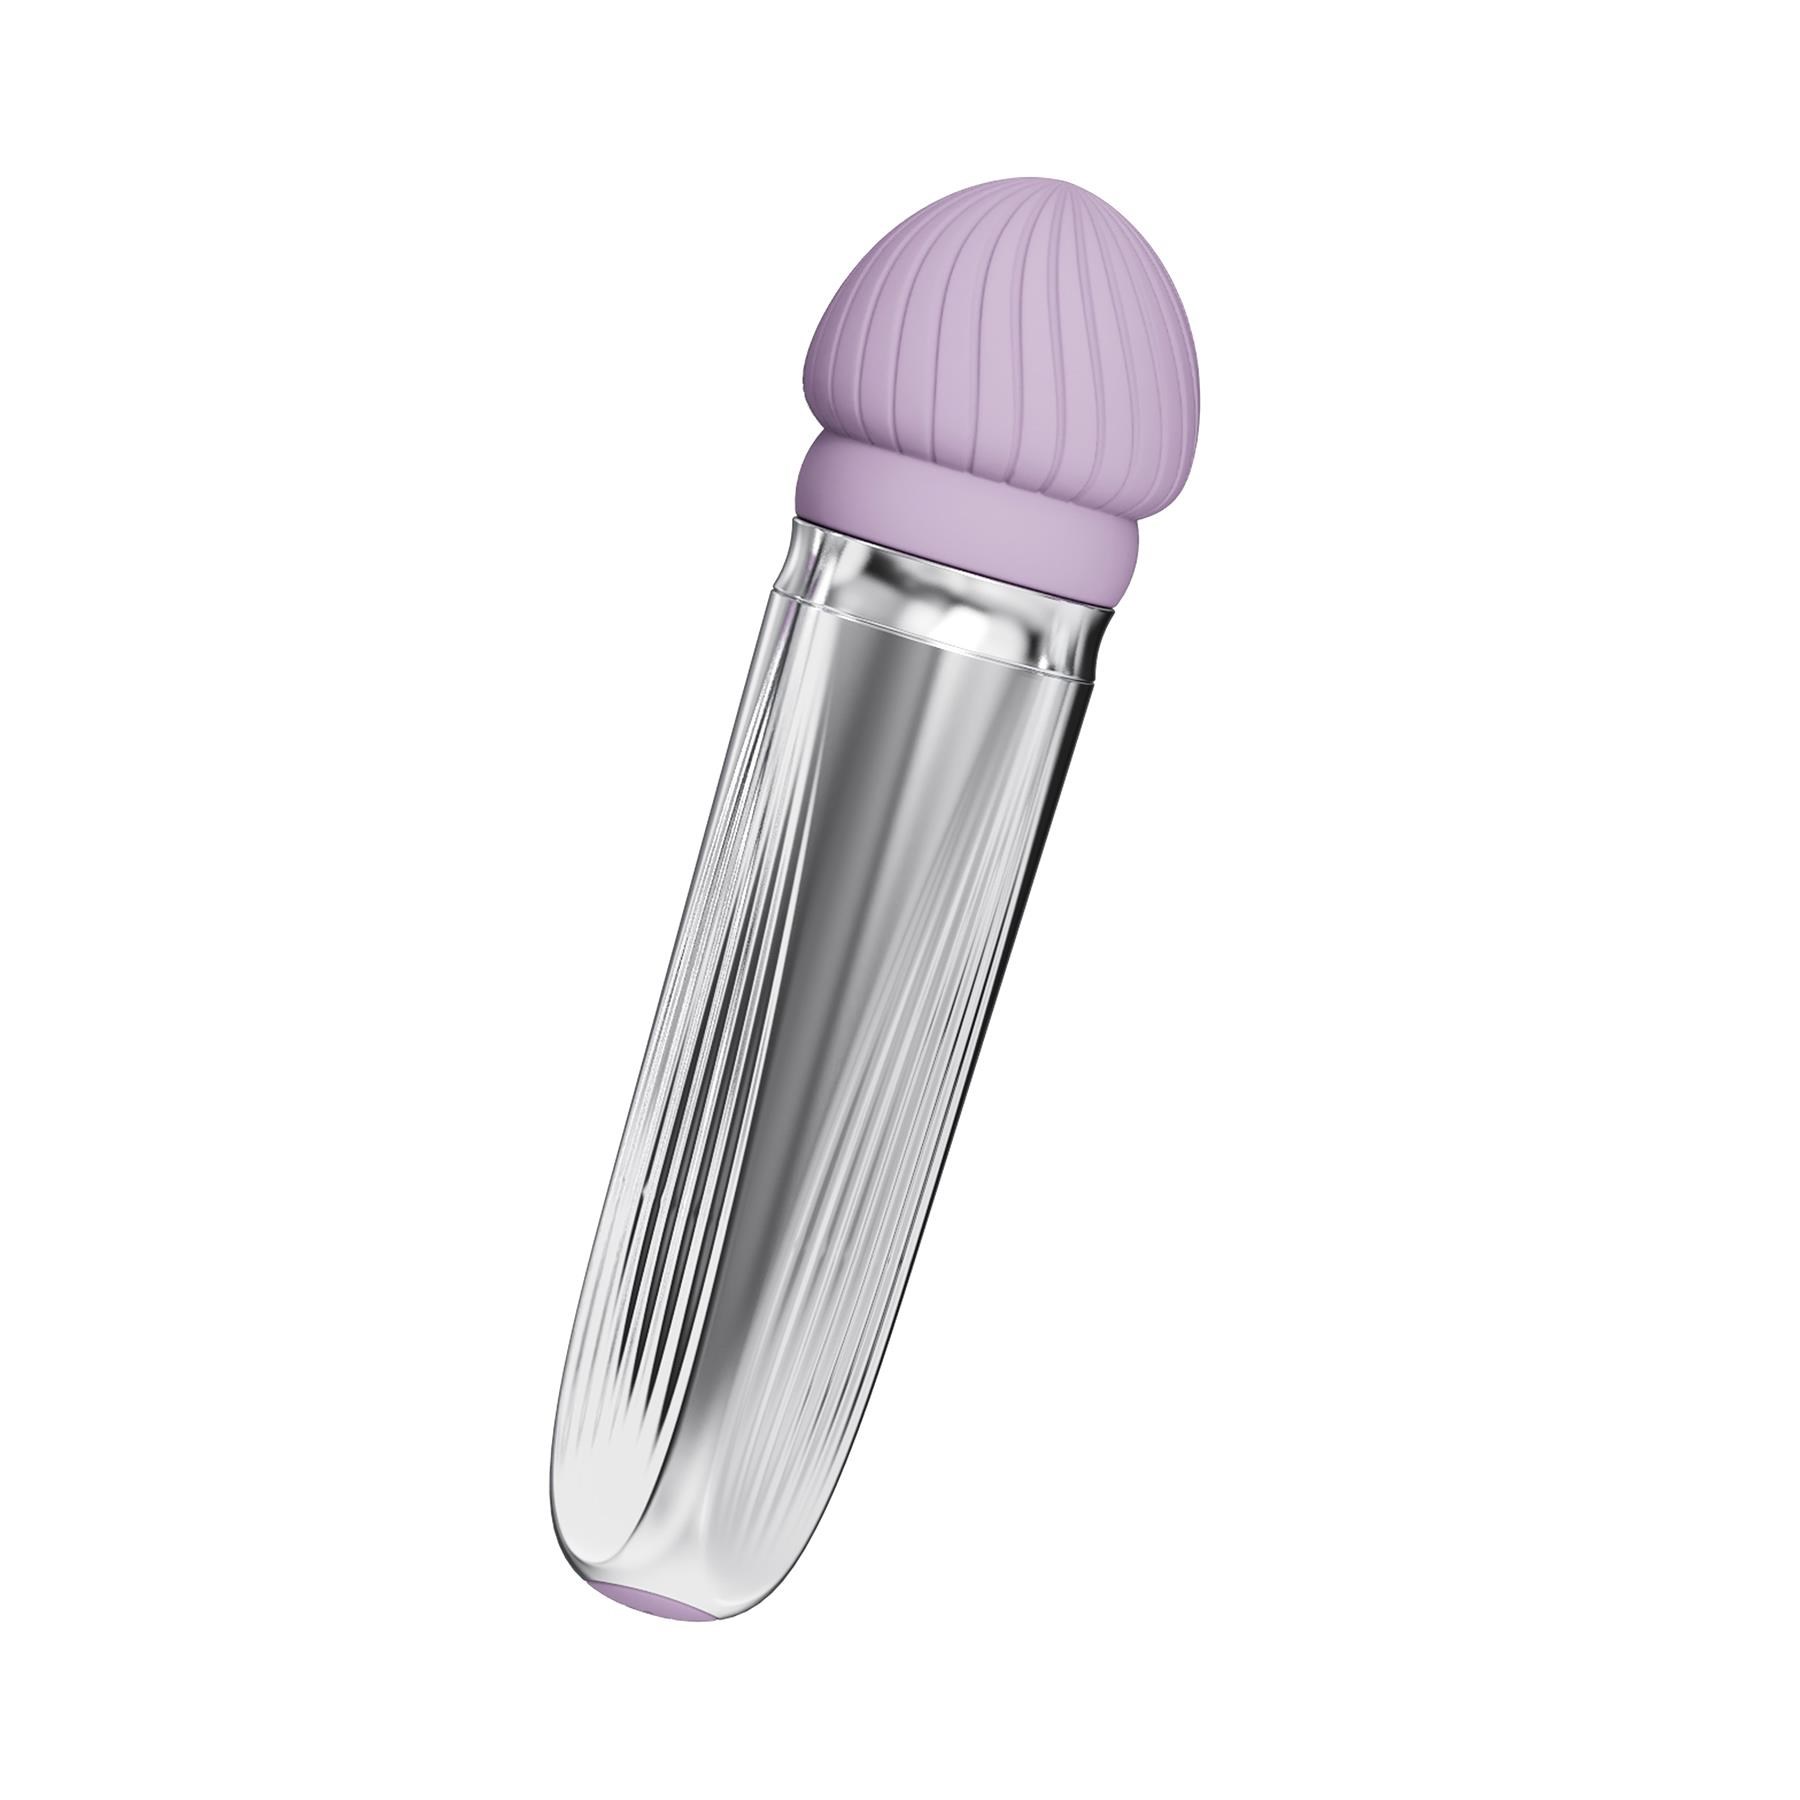 Adam & Eve Sweet Dreams Massager Kit - Rounded Attachment